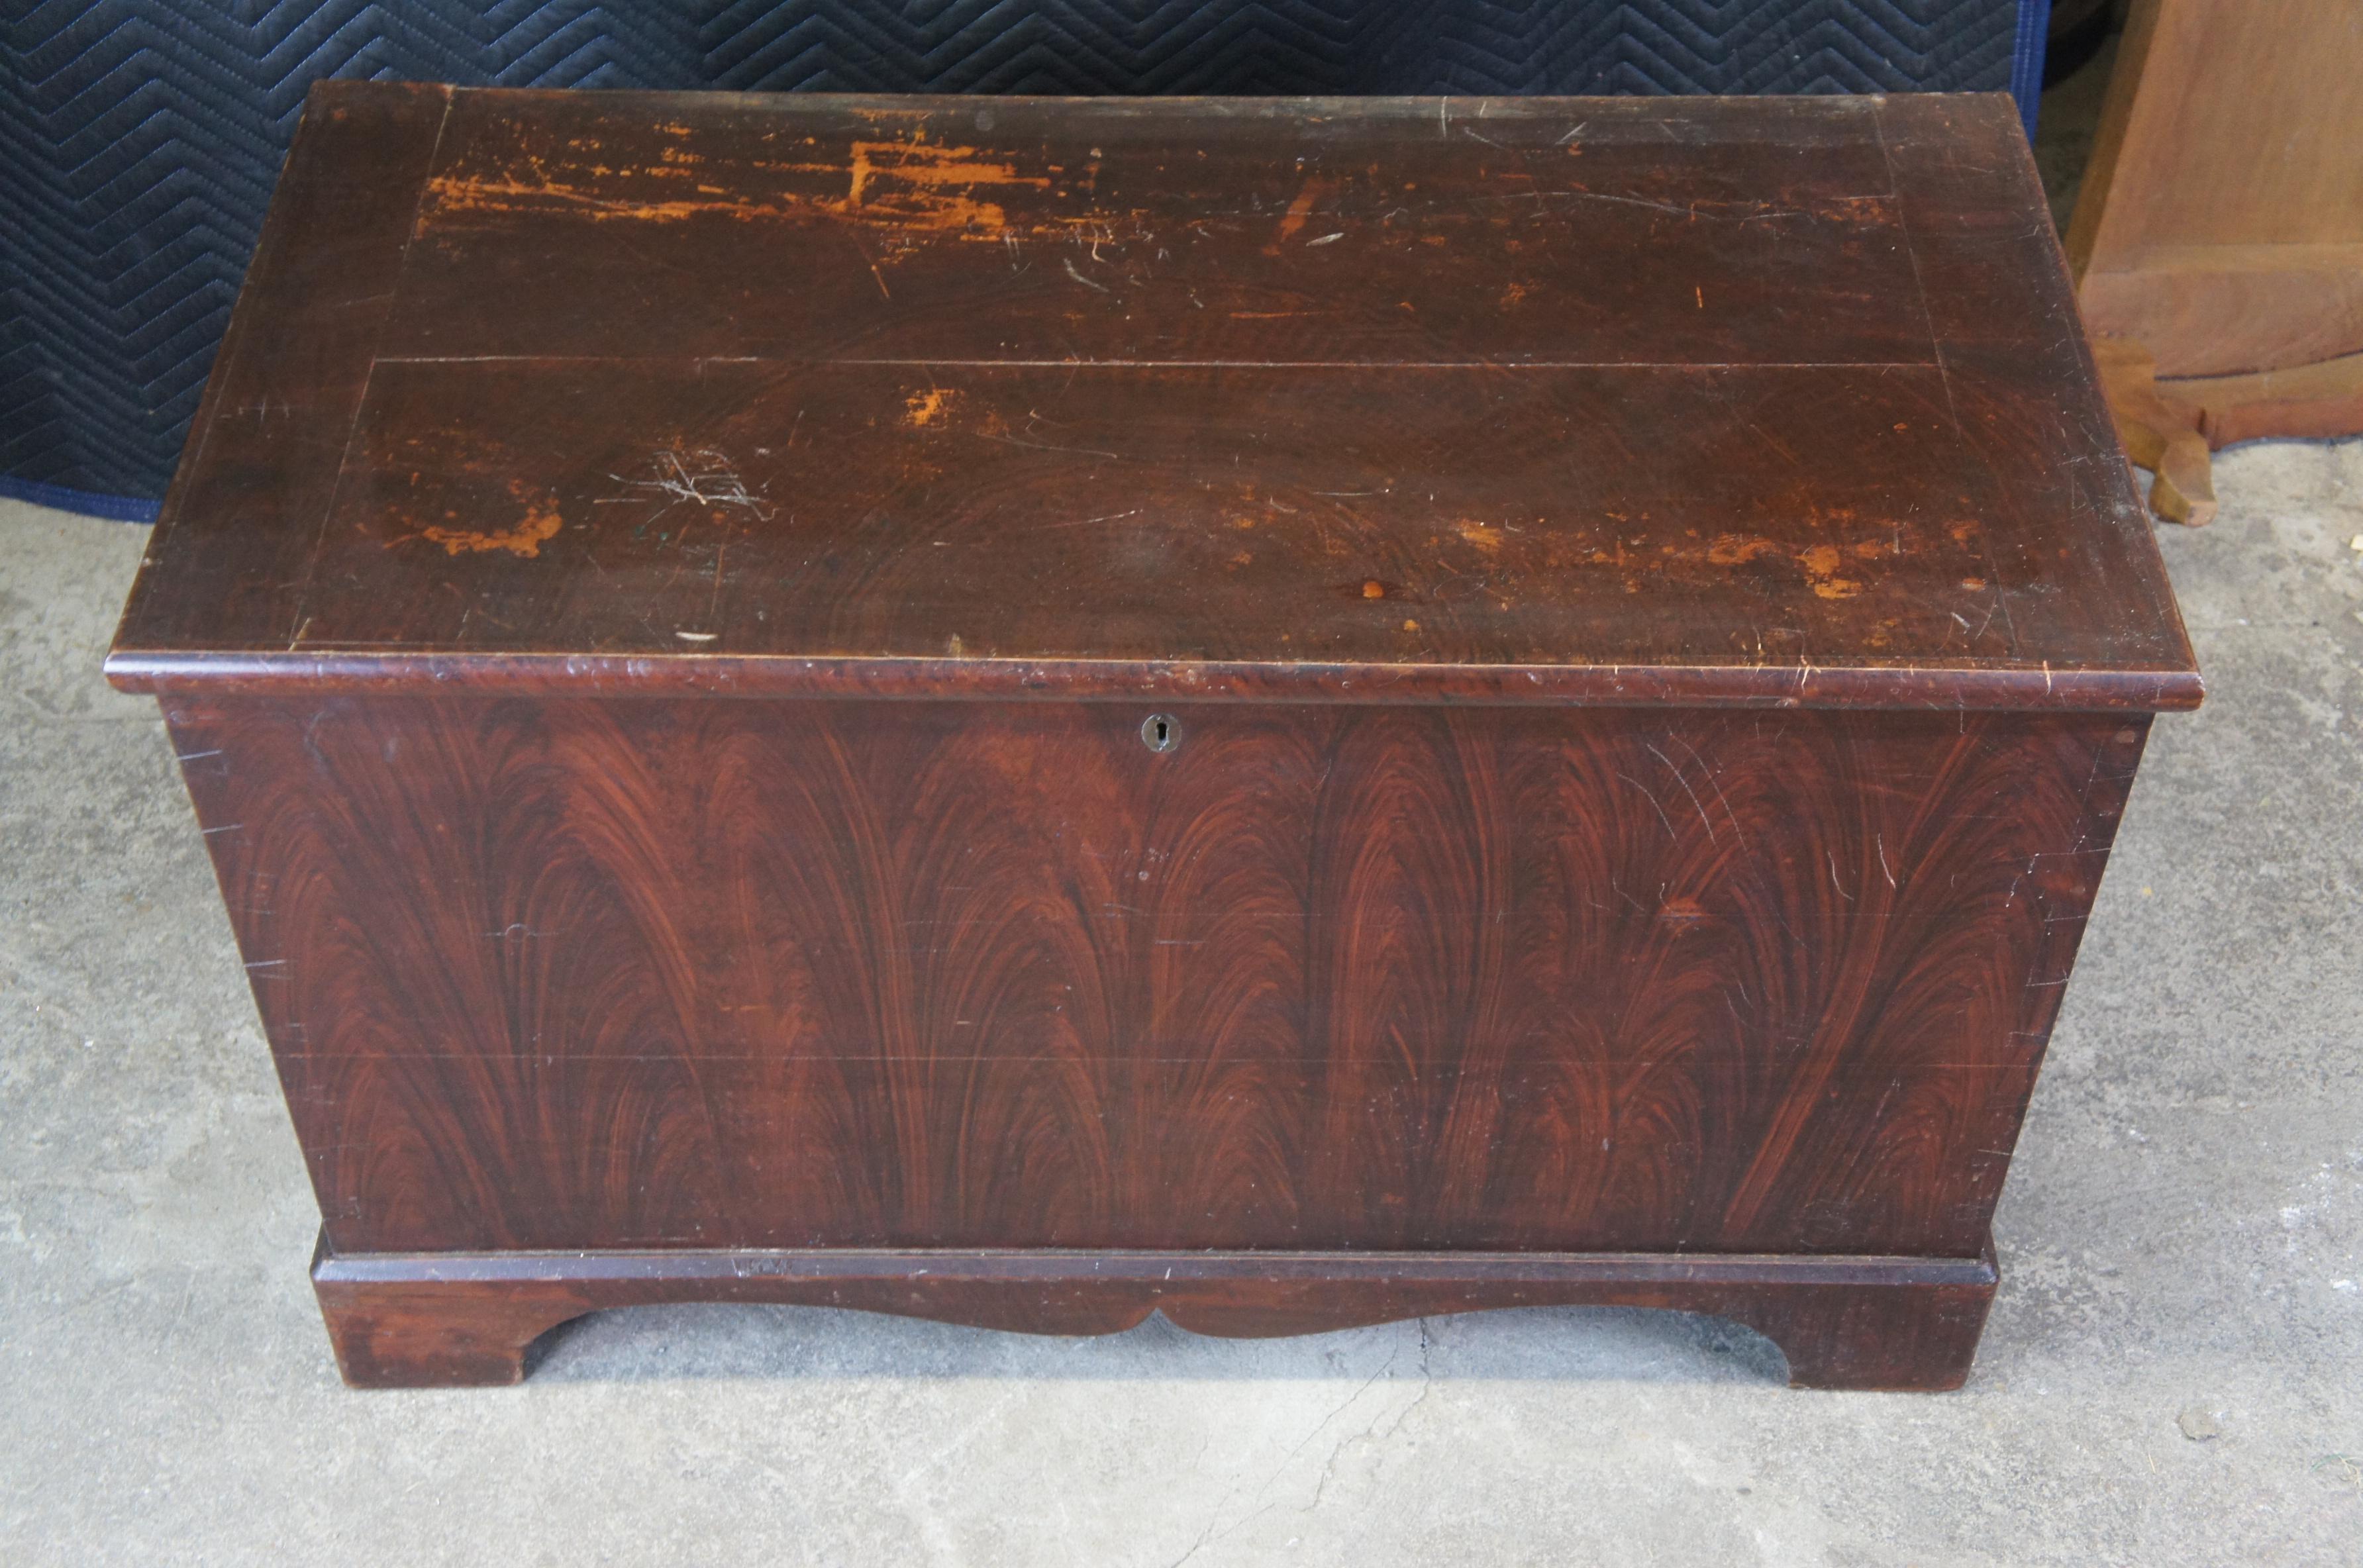 Antique 19th Century Painted Grain Poplar Dovetailed Blanket Storage Trunk Chest In Fair Condition For Sale In Dayton, OH